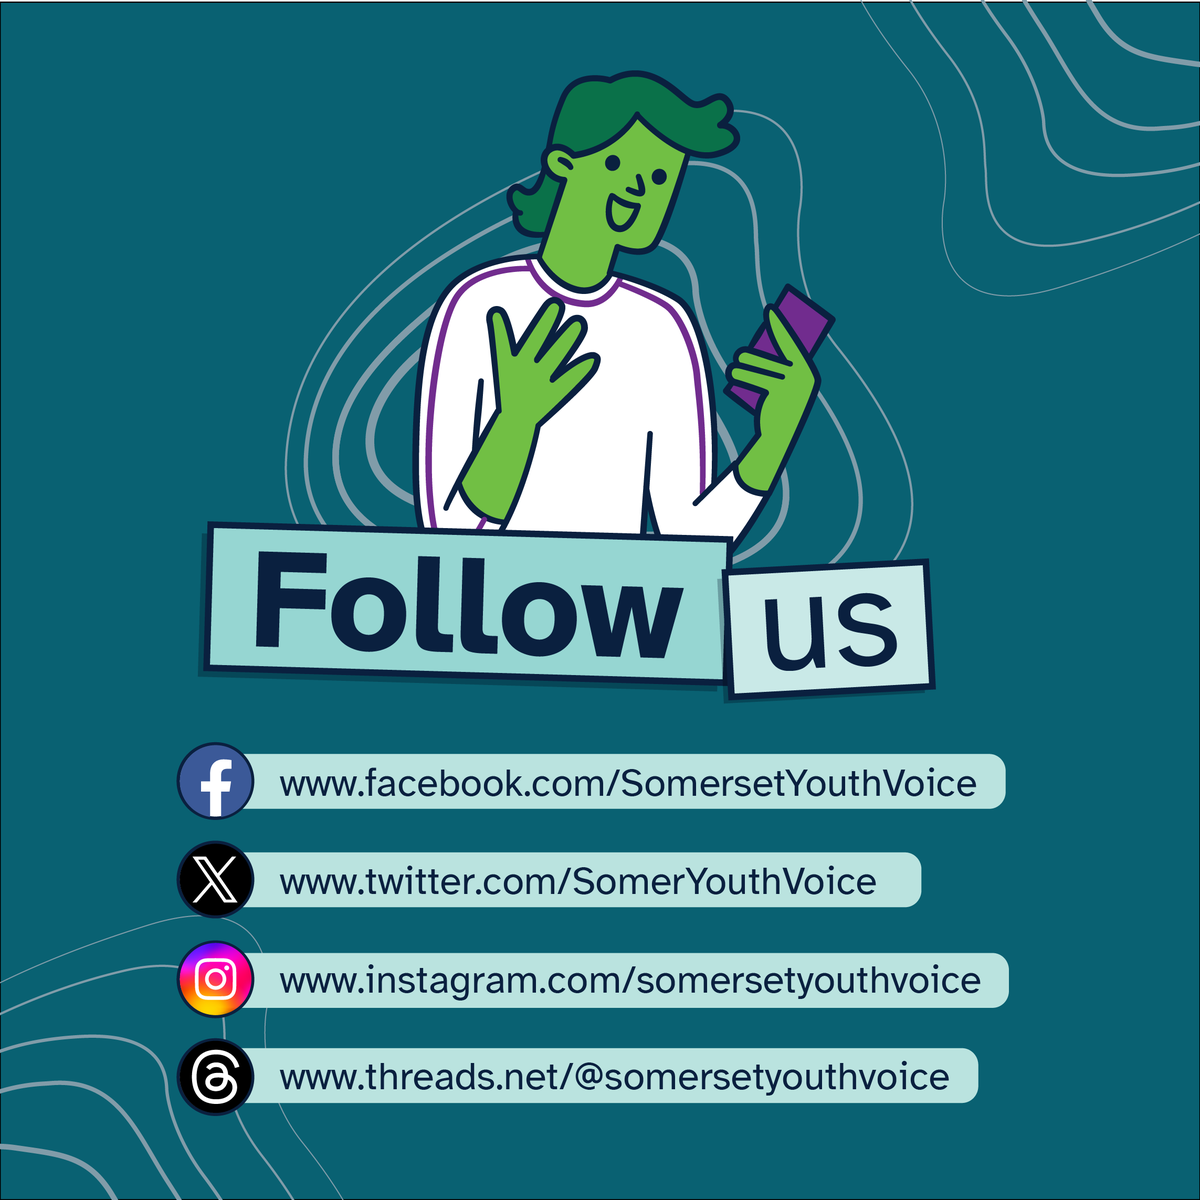 Did you know that we have social media accounts on all the major platforms. Give us a follow and say hello.